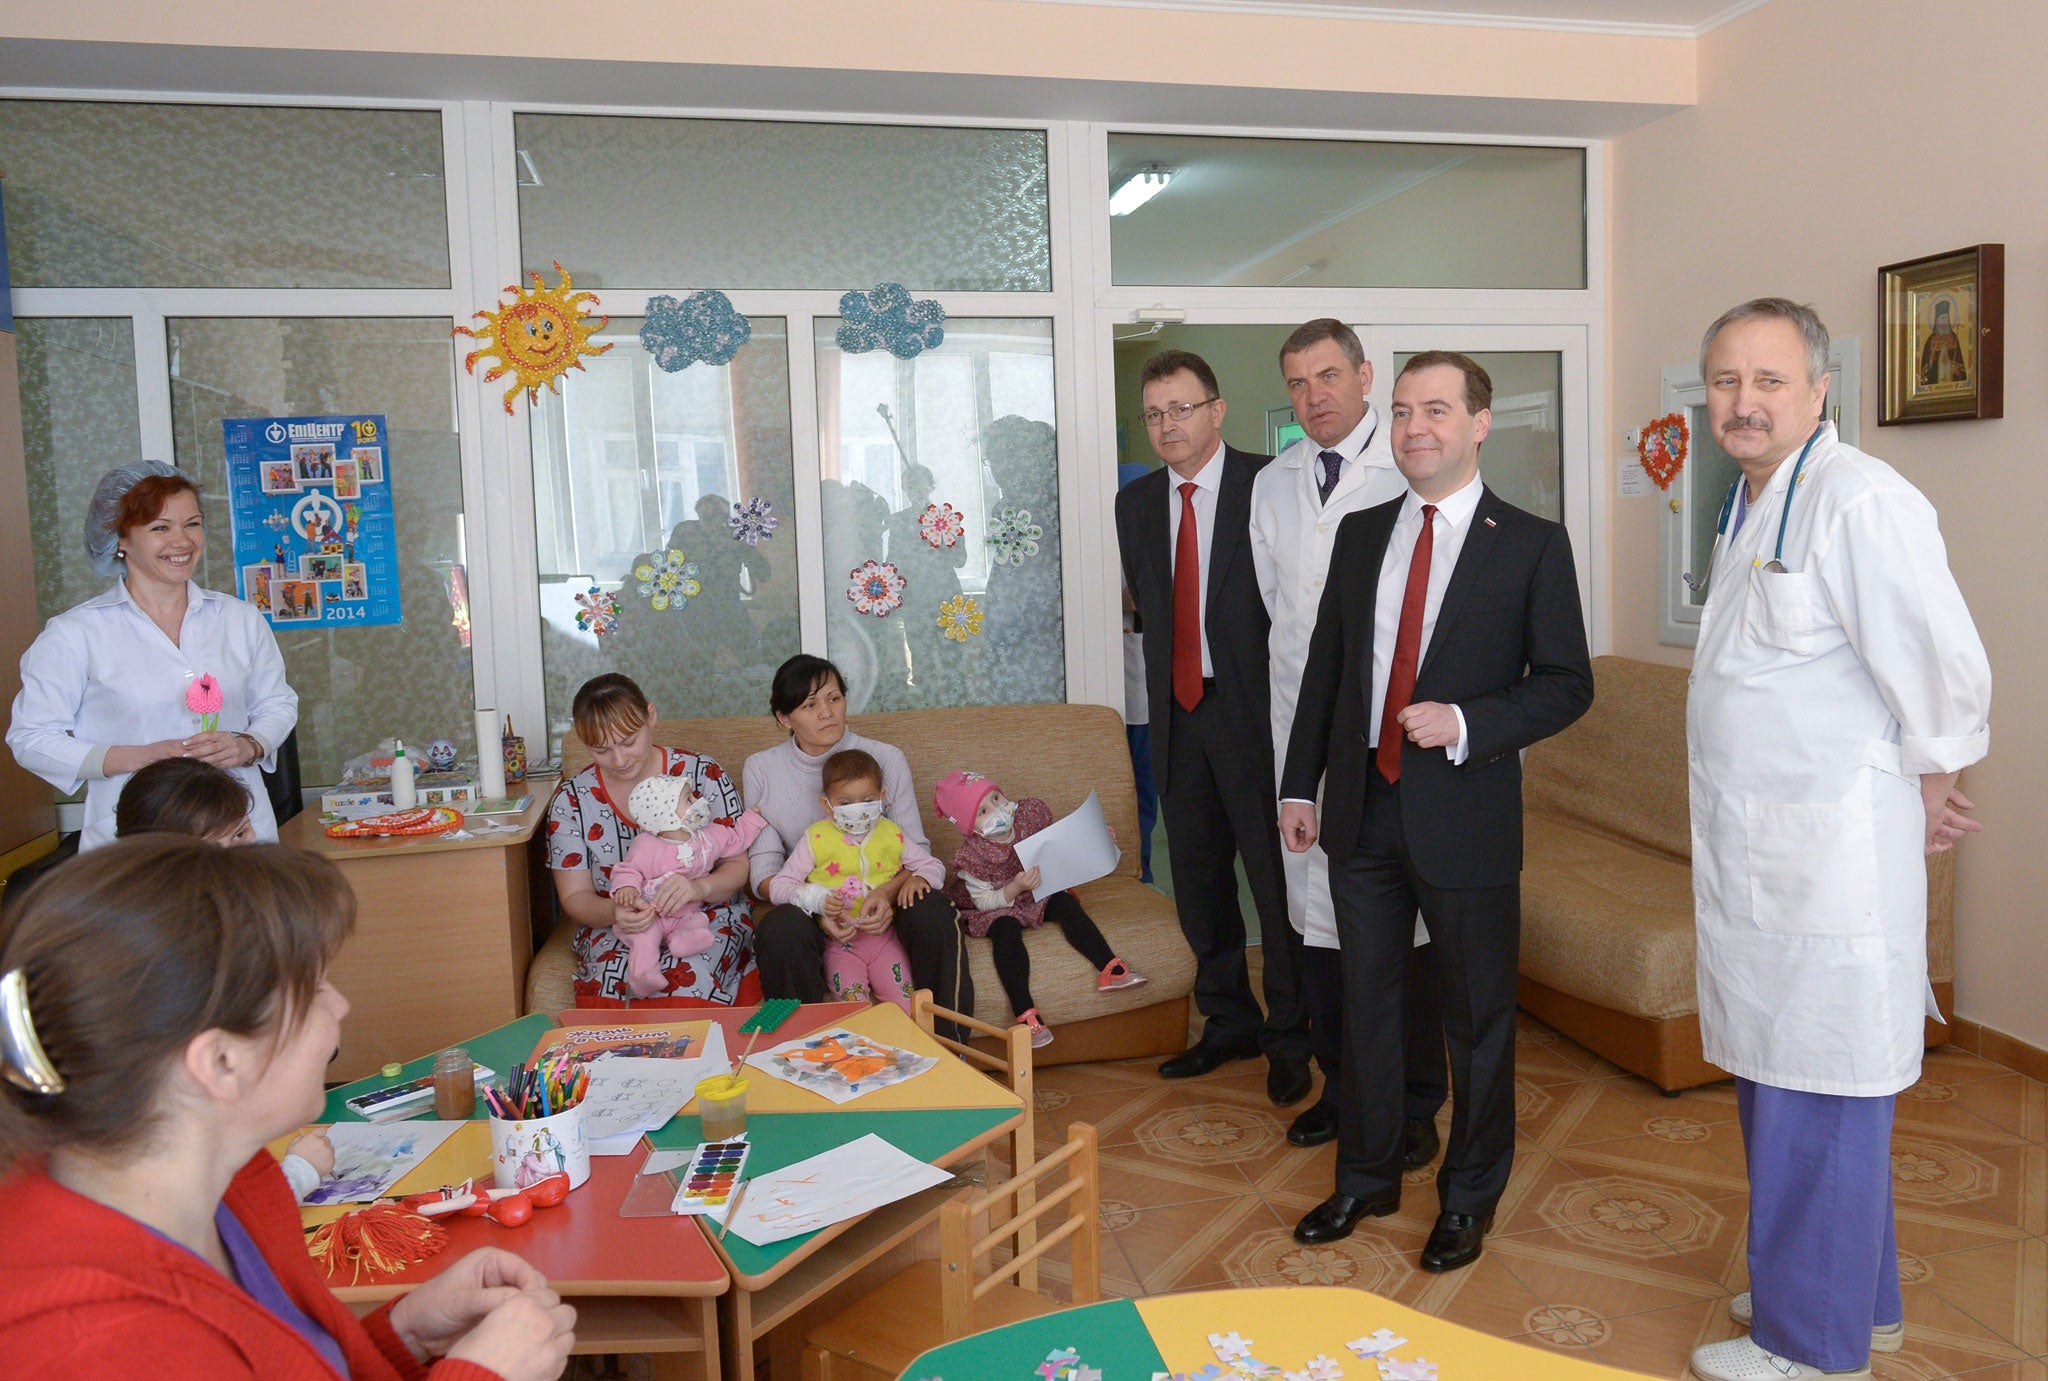 Russian Prime Minister Dmitry Medvedev (2-R) flanked by hospital's chief physician Alexandr Astakhov (3-R) visits the Simferopol Republican Pediatric Hospital in Simferopol, Crimea